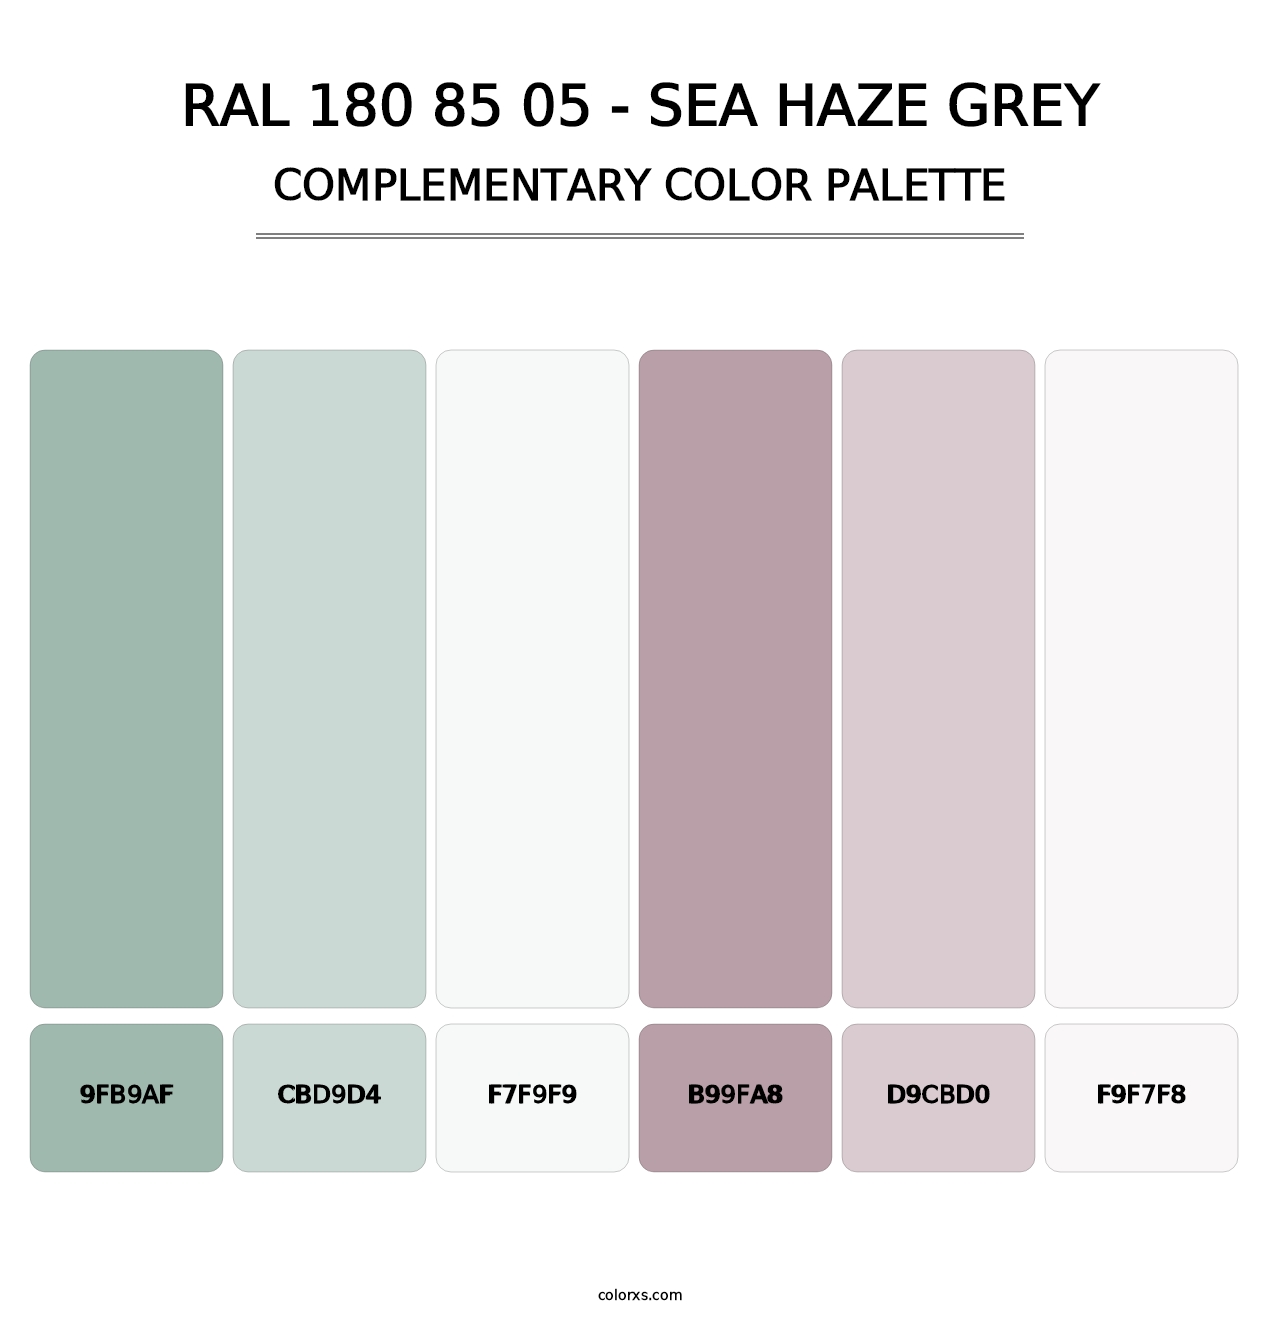 RAL 180 85 05 - Sea Haze Grey - Complementary Color Palette